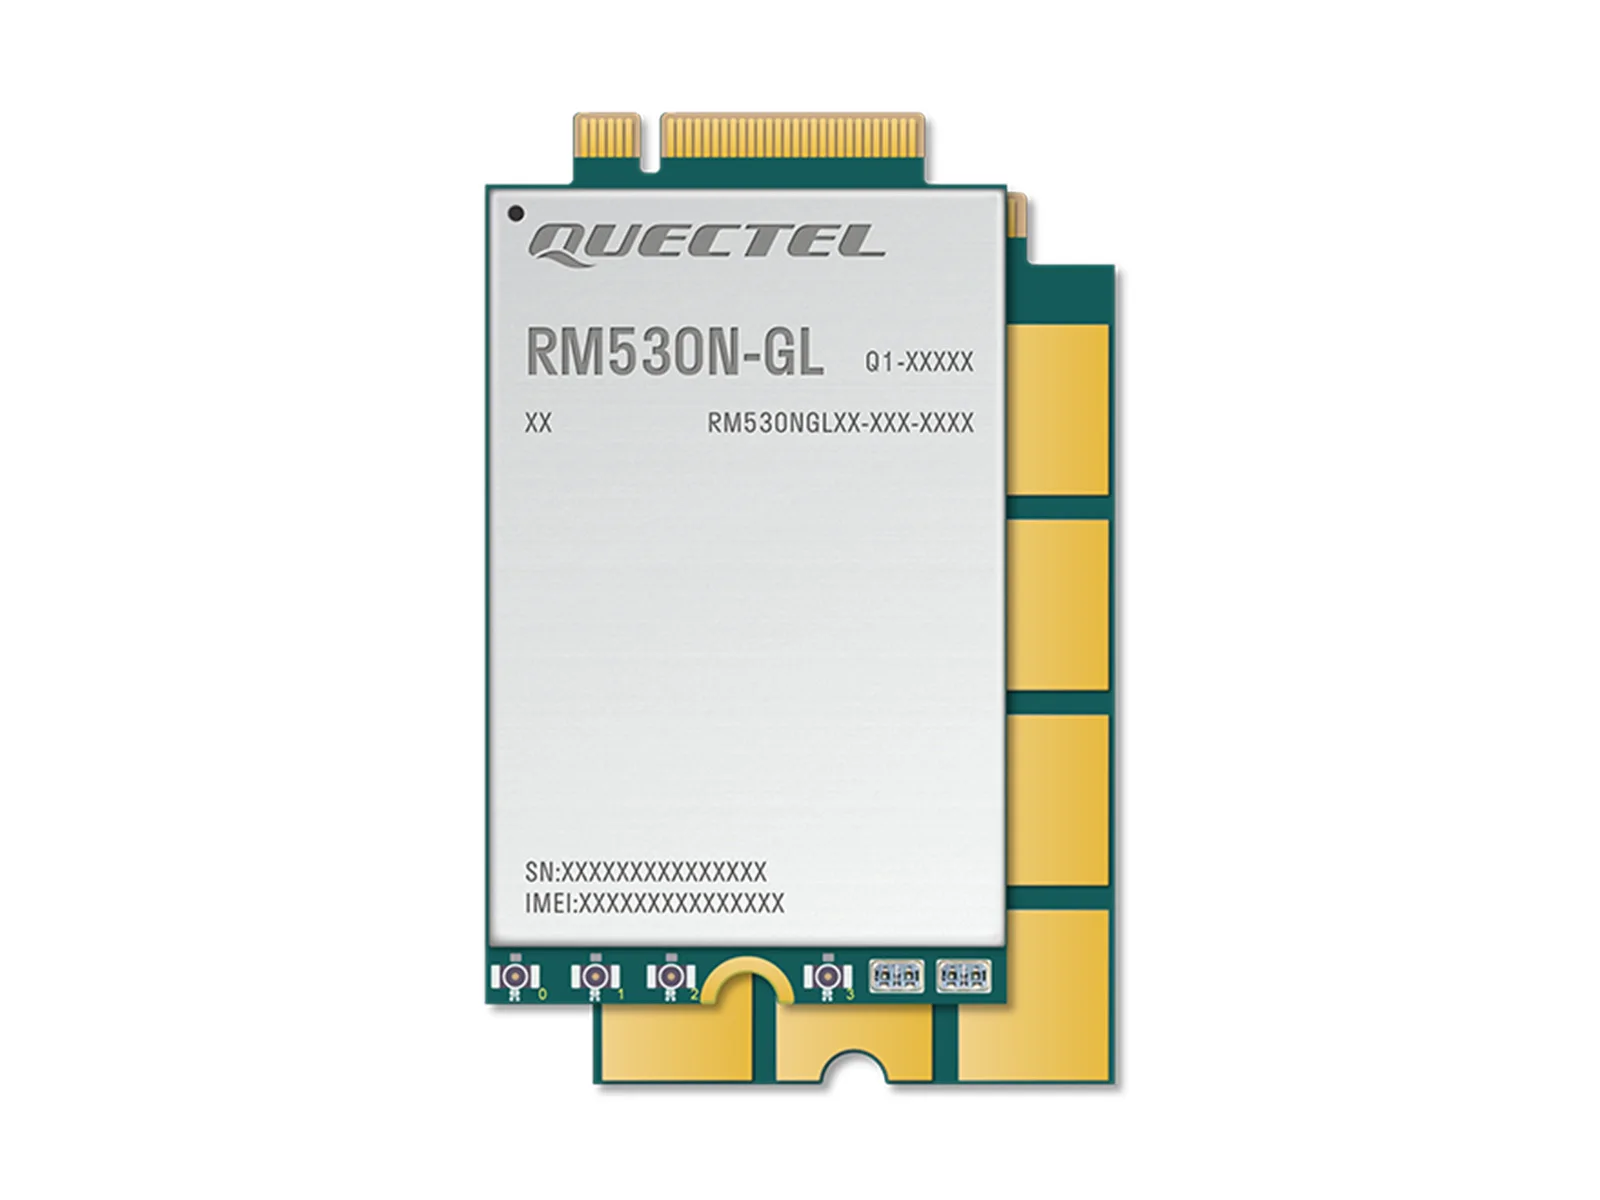 

5G Sub-6G & mmWave Module, Quectel RM530N-GL IoT 5G Global Band Module, M.2 Form Factor With 3GPP 5G Release 16 Specification